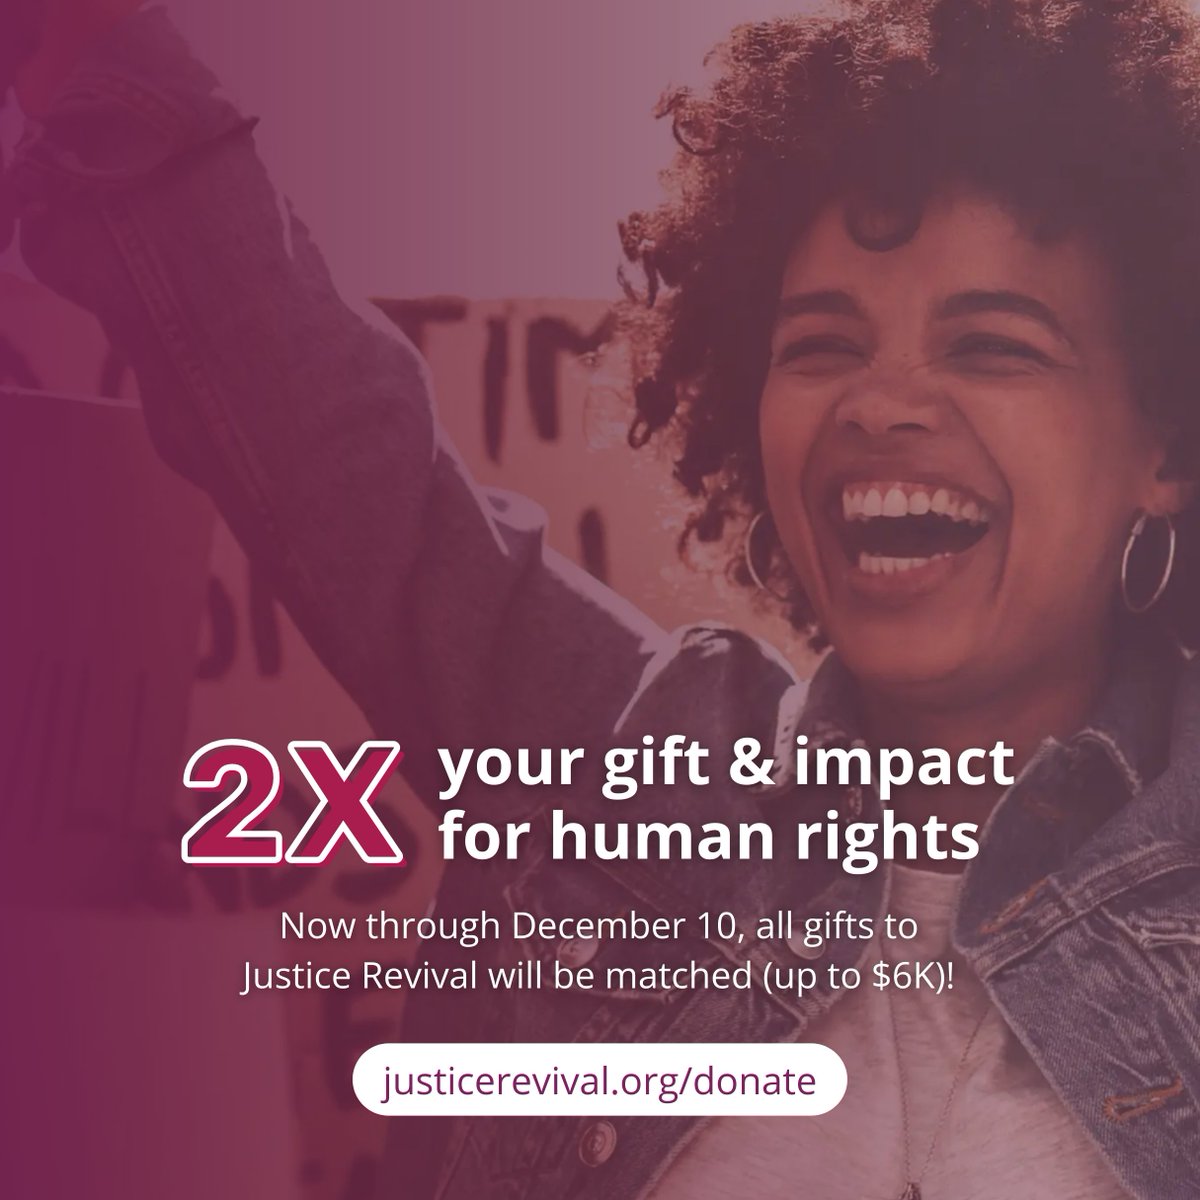 Double your gift & impact today! ⁠ Now through Human Rights Day on 12/10, every dollar you give to Justice Revival will be matched by our Board of Directors 🎉⁠ Every gift truly matters & will help grow this faith movement for human rights in 2024: justicerevival.org/donate/